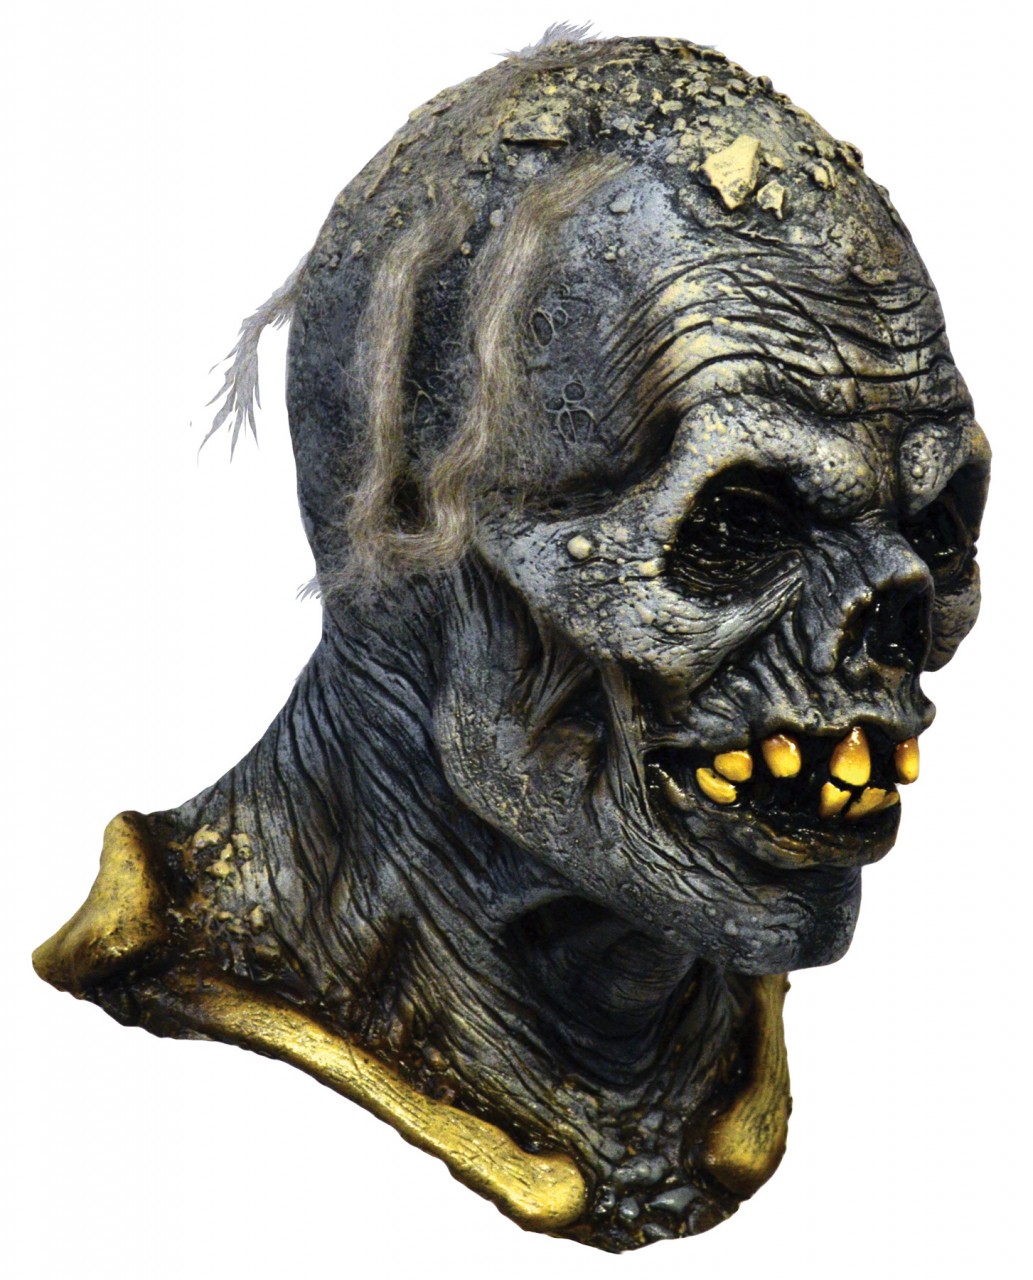 Tales from the Crypt Craigmoore Zombie Latex Mask